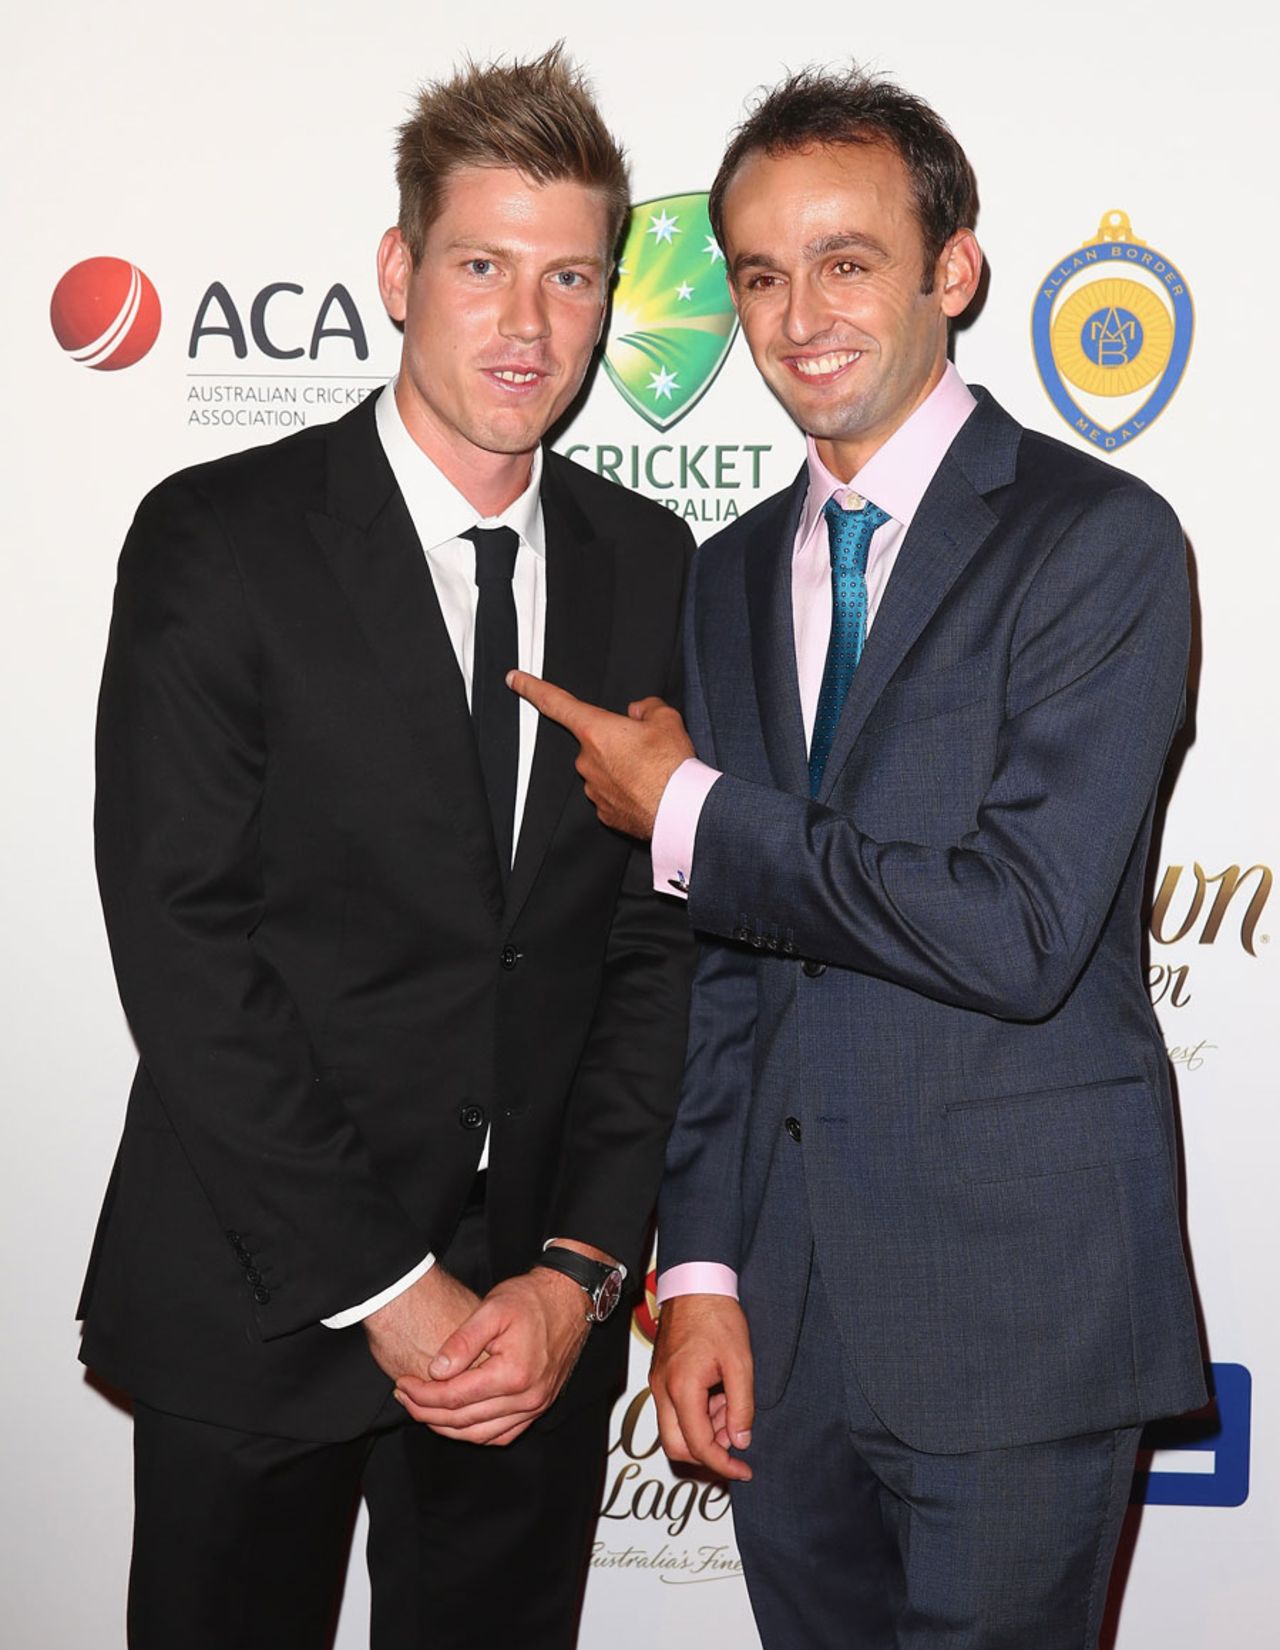 James Faulkner and Nathan Lyon arrive at the Doltone House, Sydney, January 20, 2014